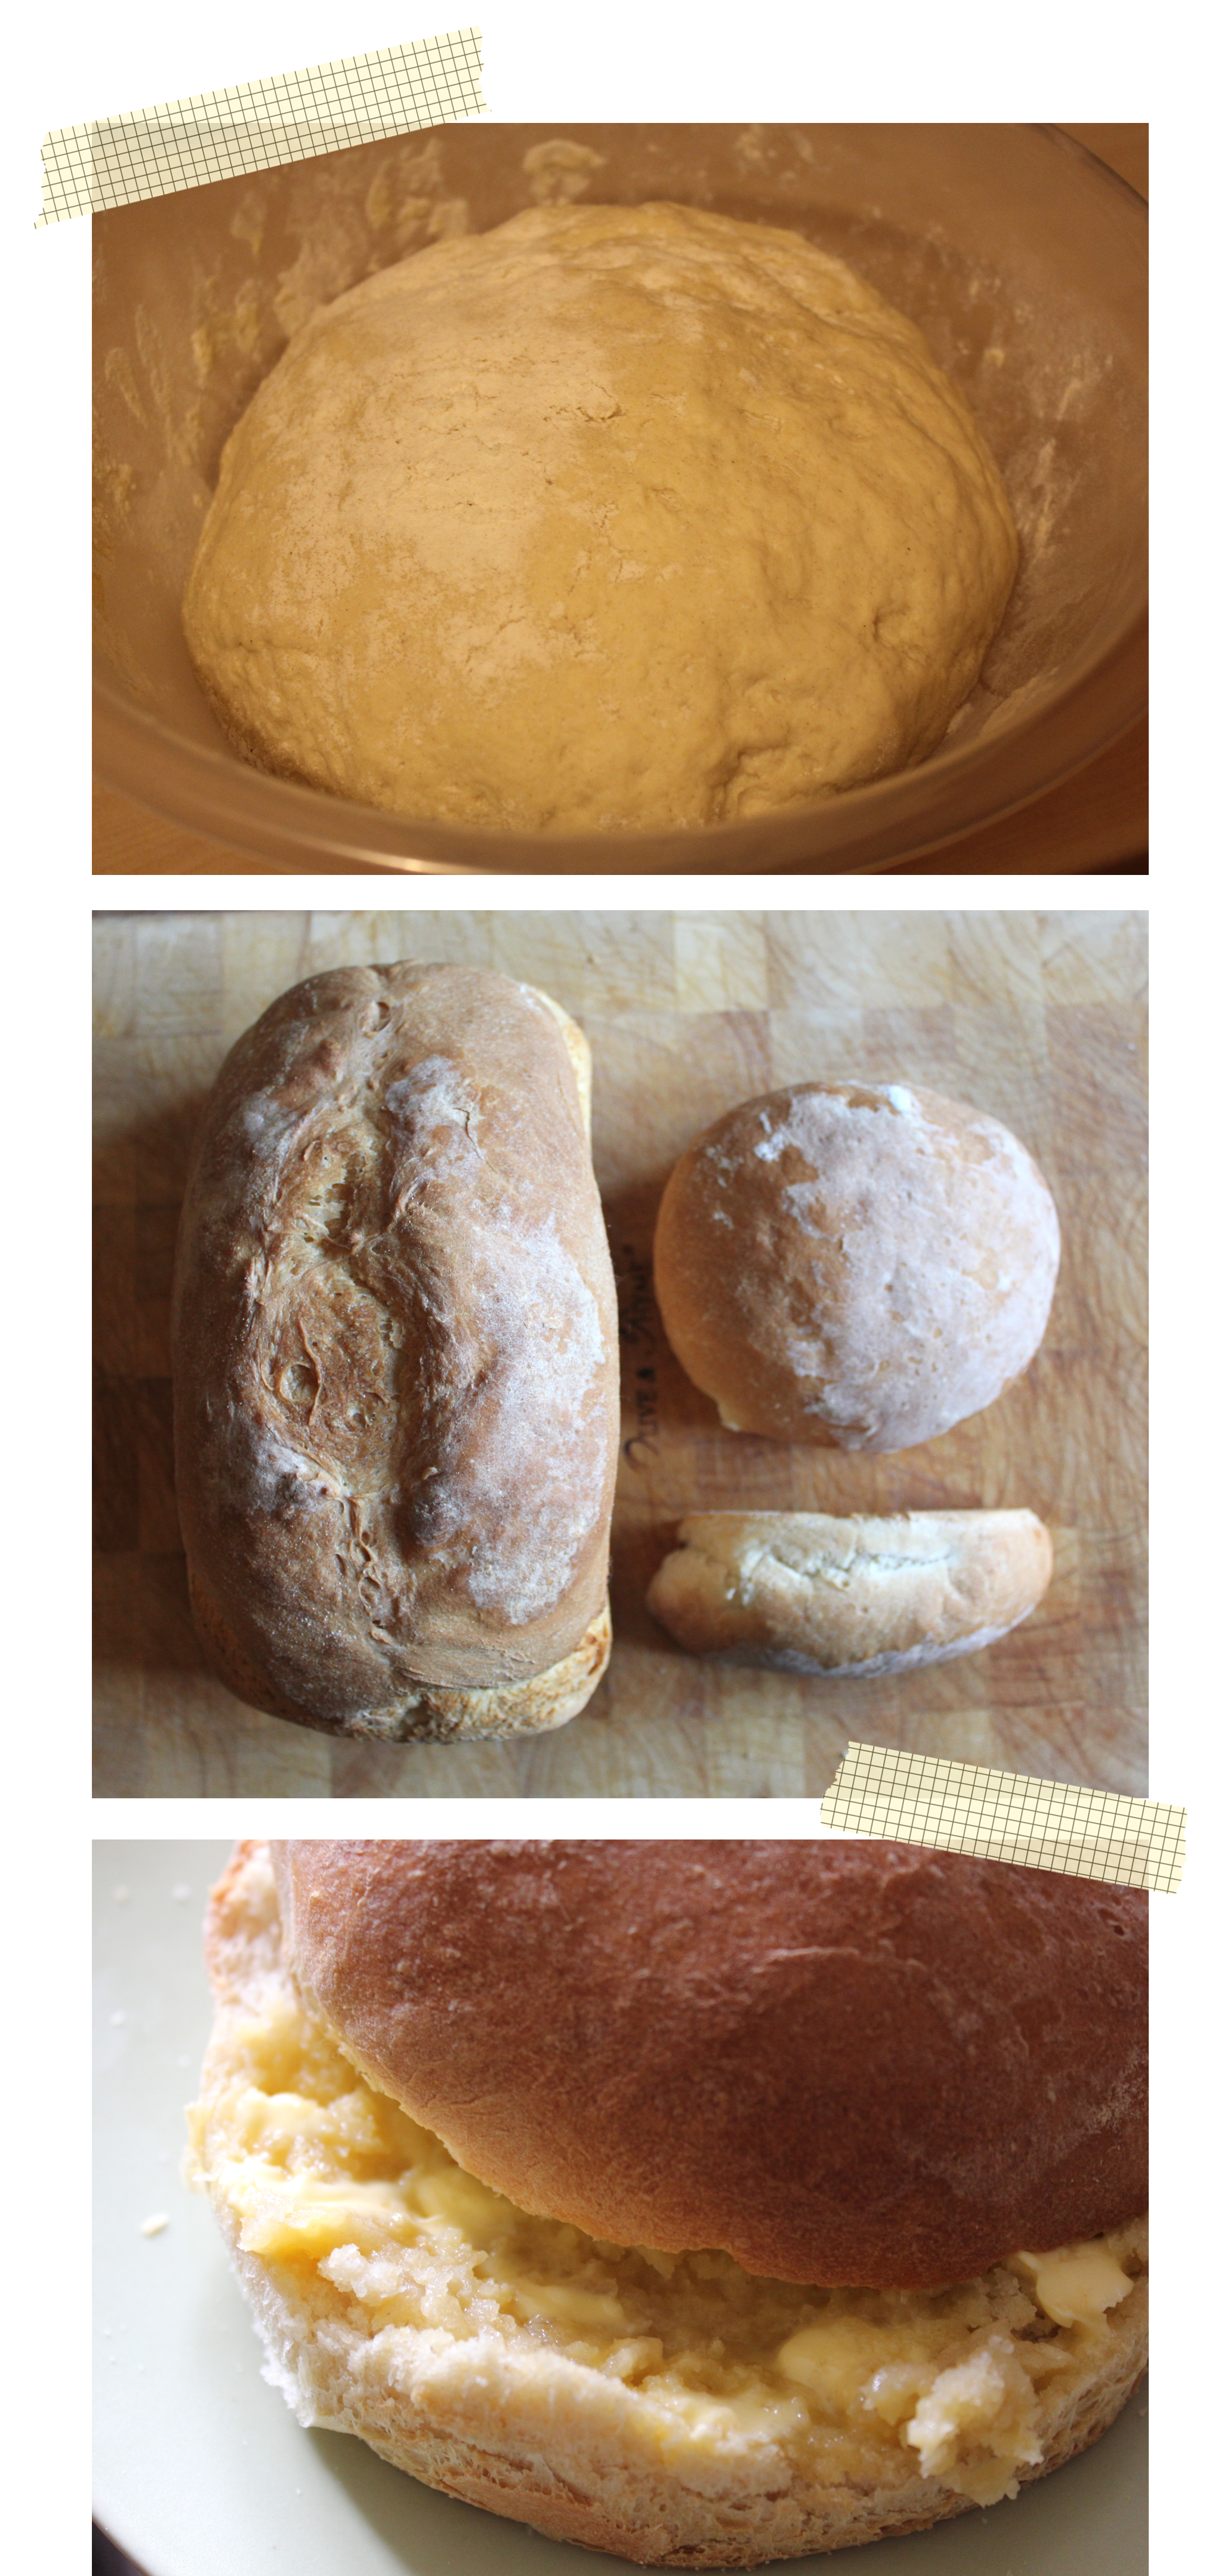 pieday friday recipe for loaf of bread and crusty rolls